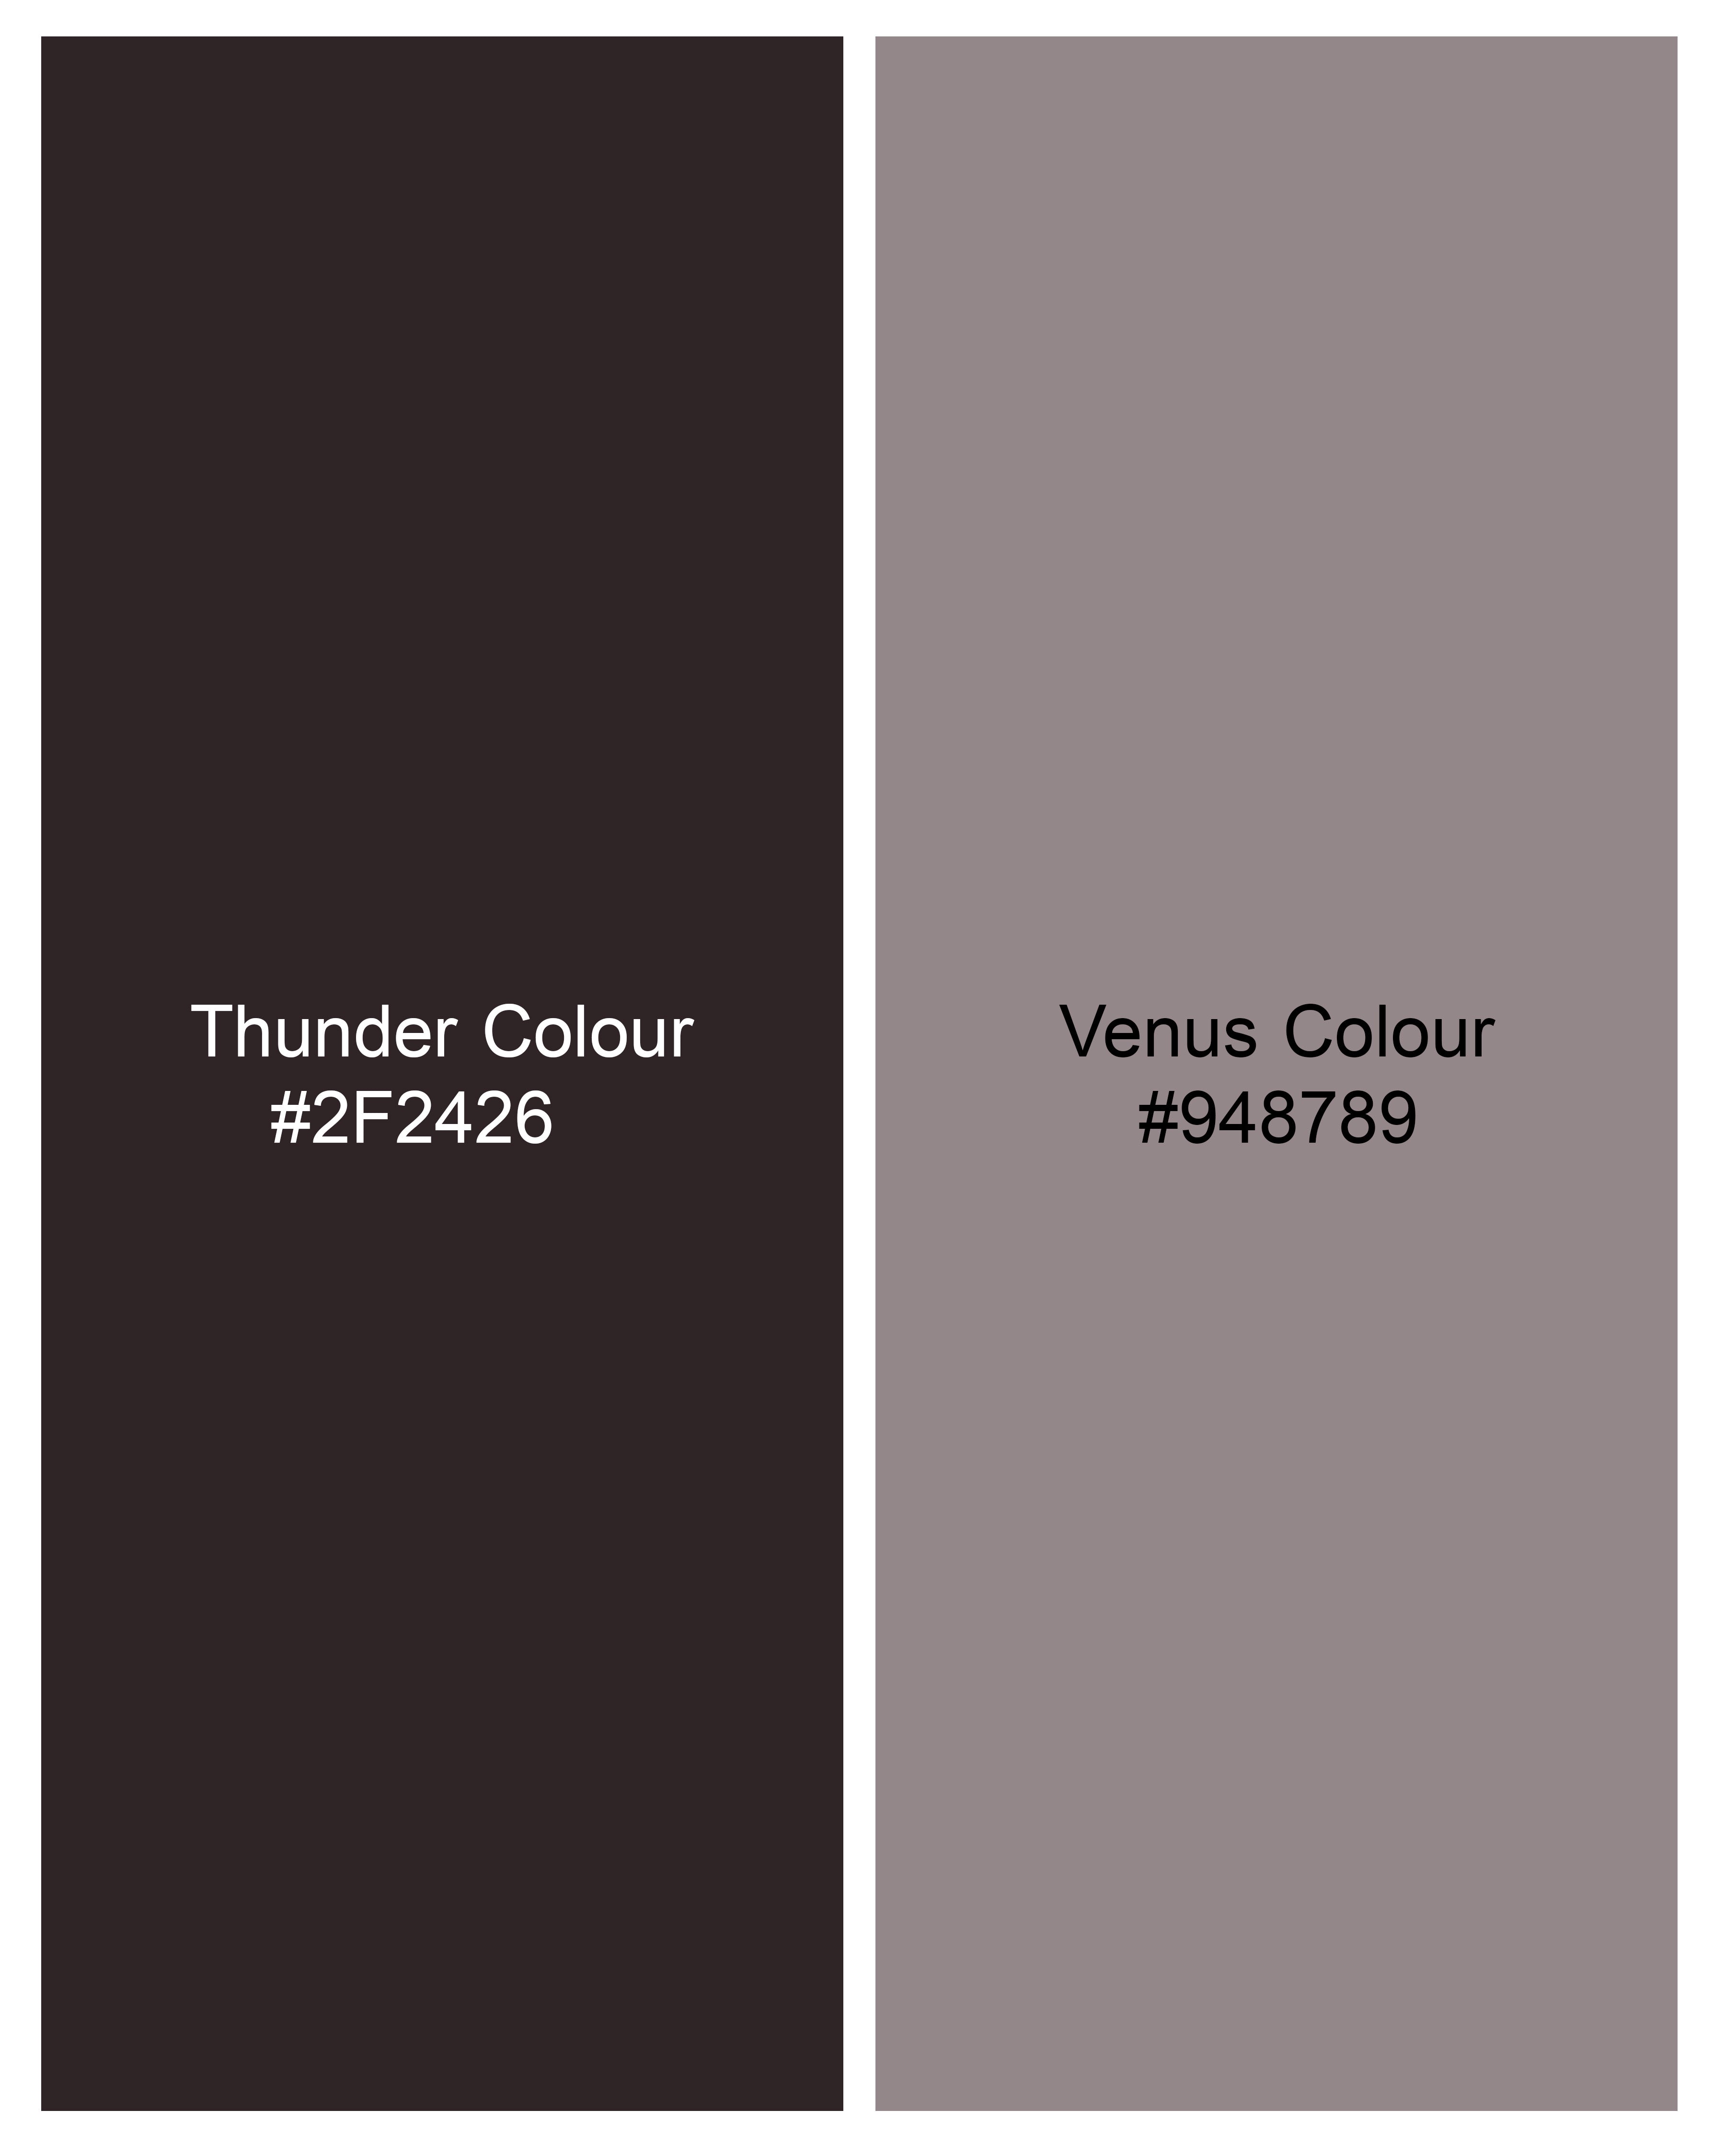 Thunder with Venus Brown Flared Dress WD030-32, WD030-34, WD030-36, WD030-38, WD030-40, WD030-42